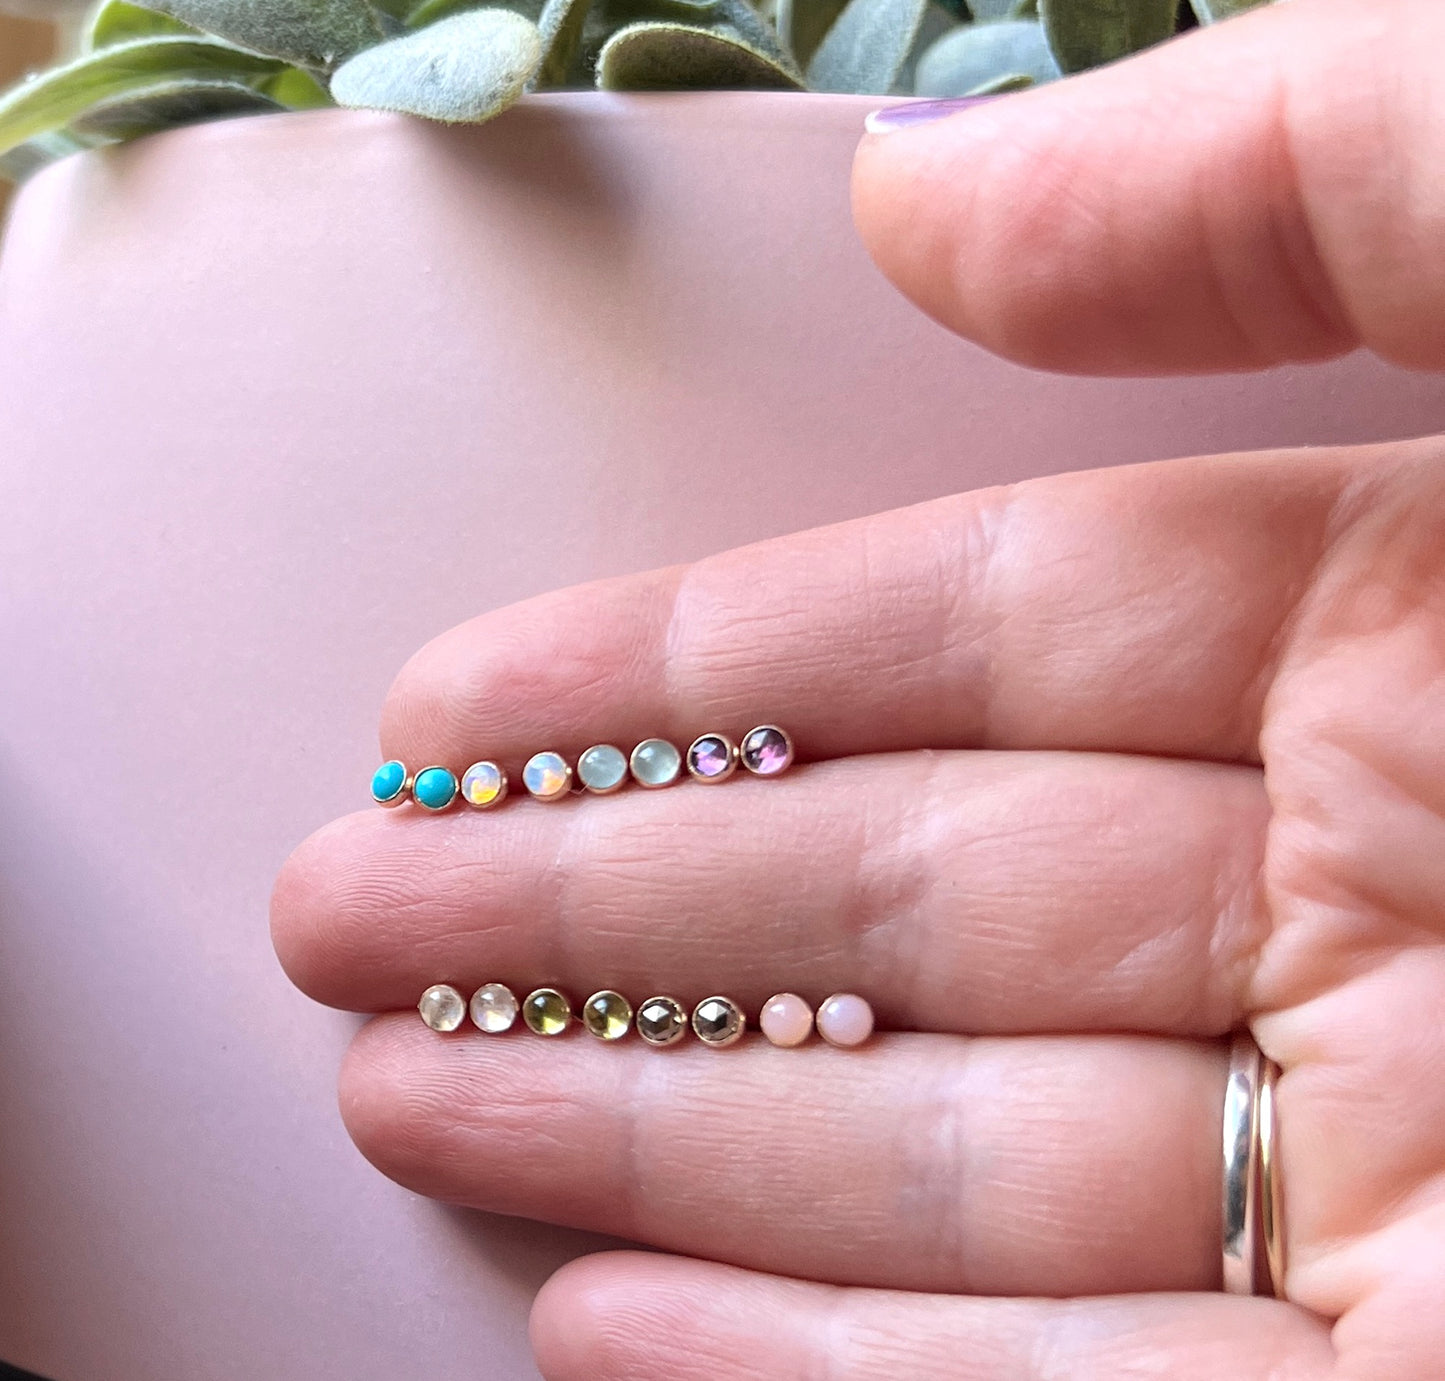 Tiny gemstone studs in 14k goldfill with opals, turquoise, moonstone, aquamarine, peridot, pyrite, amethyst